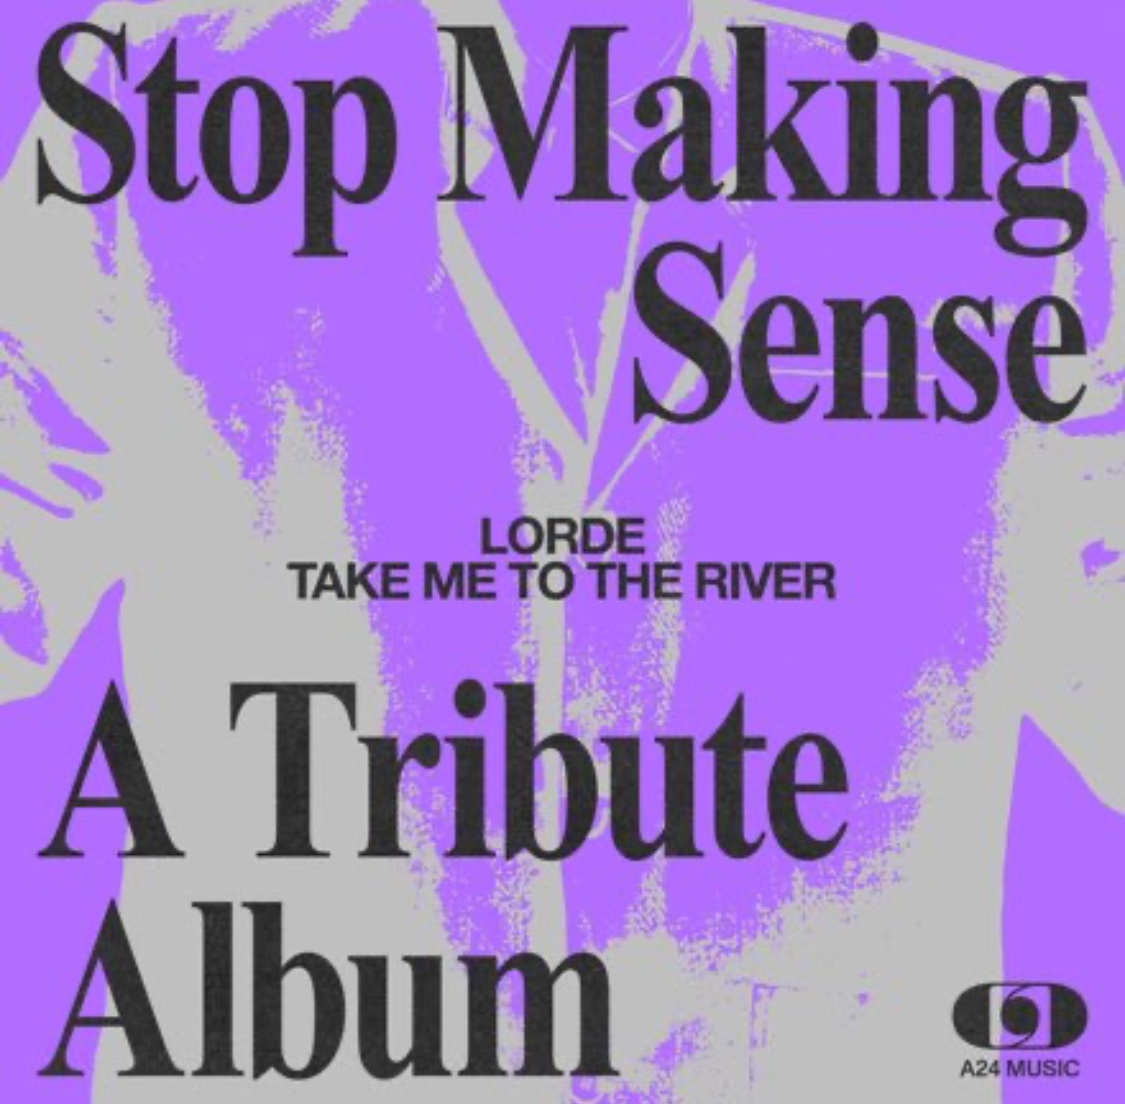 Pre-save Lorde’s new cover song ‘Take Me to the River’. — The track is part of ‘Stop Making Sense’, a Talking Heads tribute album by A24. a24music.lnk.to/TakeMetotheRiv…